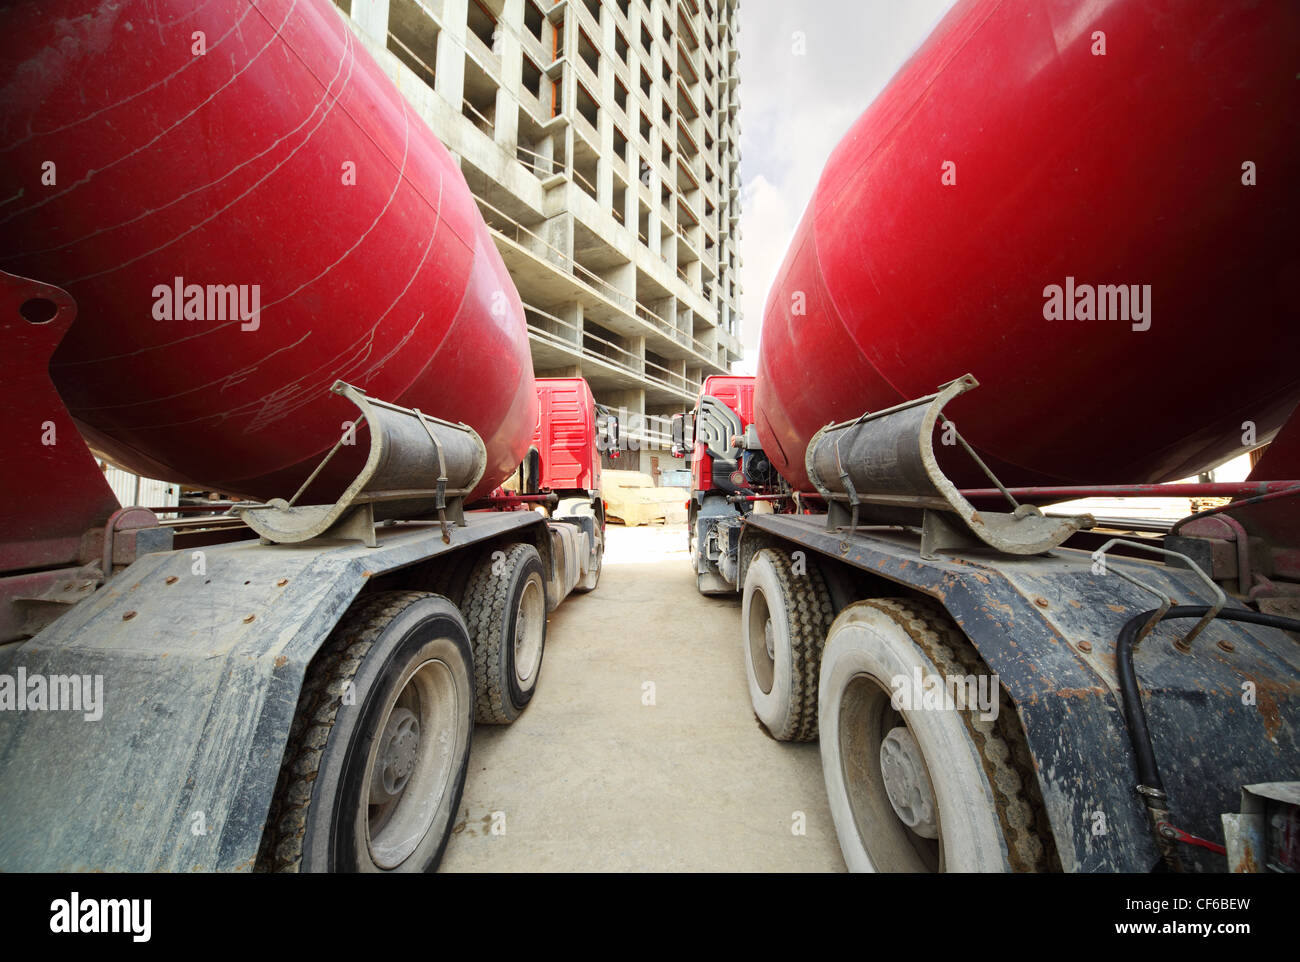 Between two concrete mixer standing near unfinished tall high-rise buildings Stock Photo